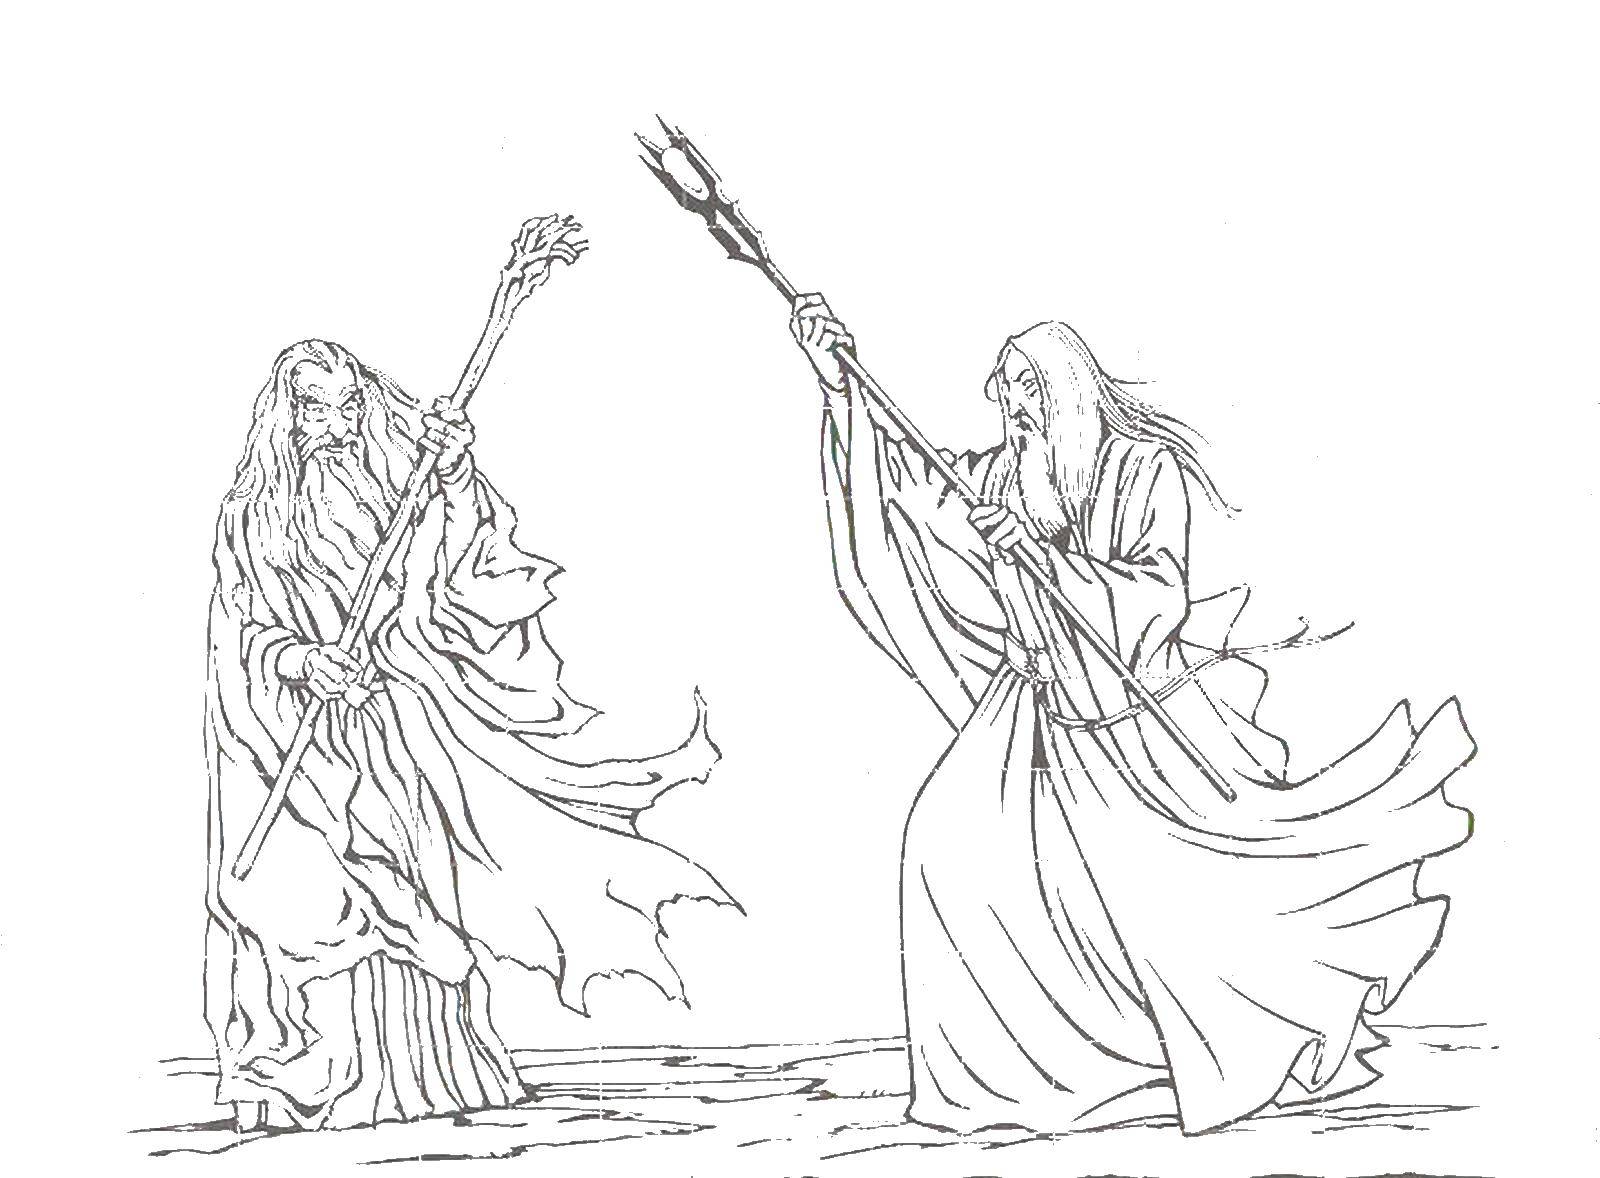 Online Coloring Pages Coloring Page Gandalf And Saruman Lord Of The Rings Coloring Pages Website